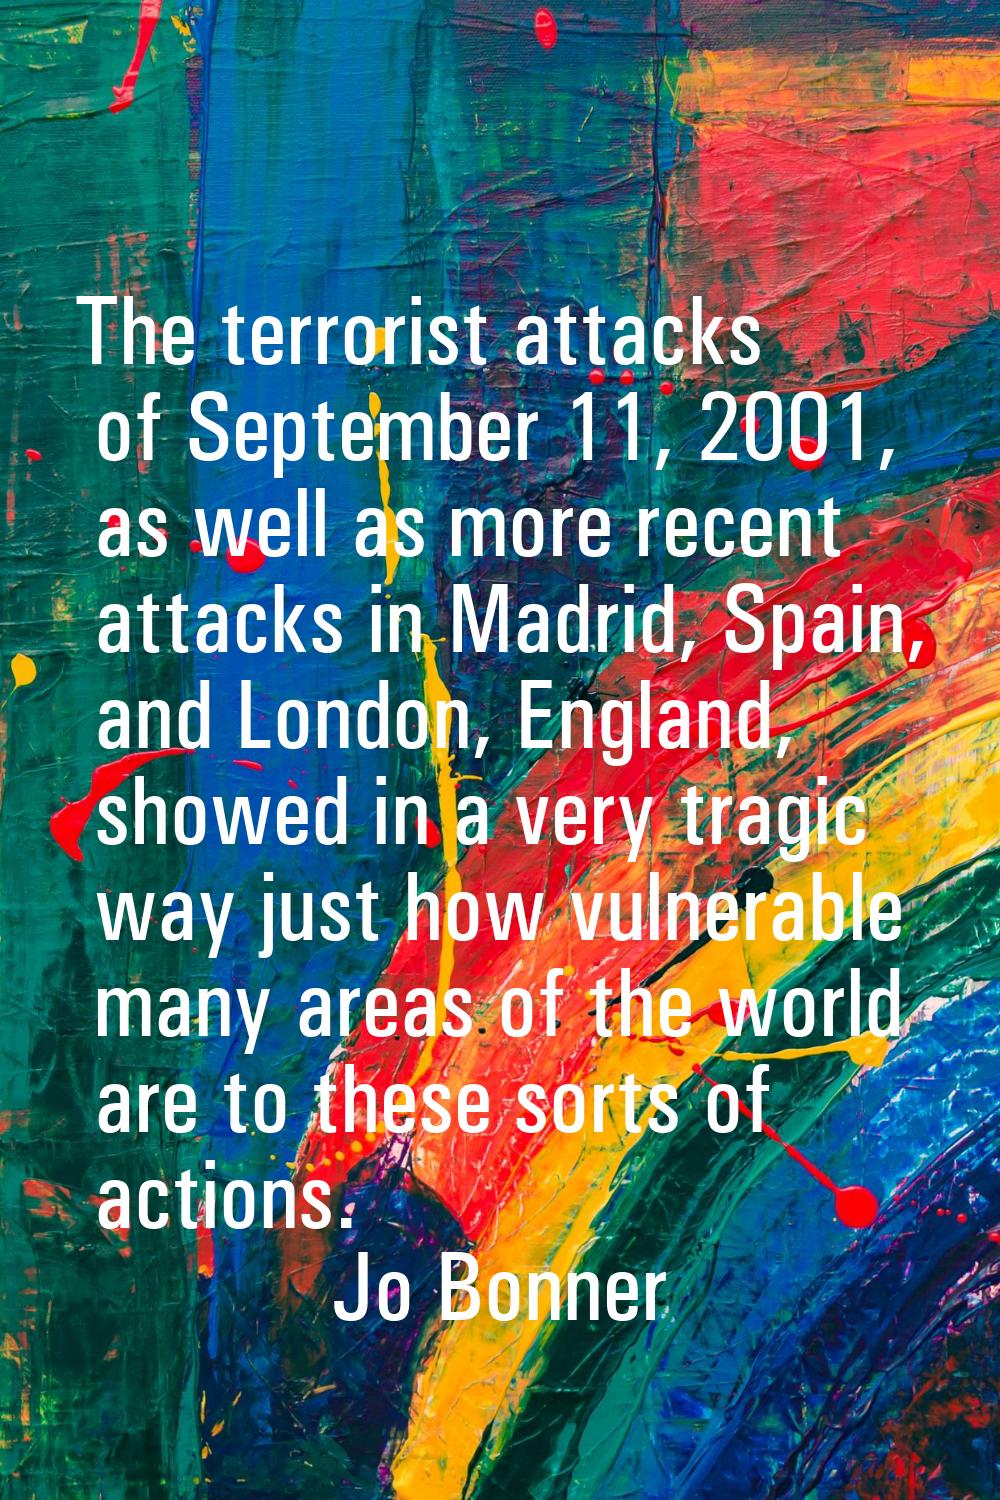 The terrorist attacks of September 11, 2001, as well as more recent attacks in Madrid, Spain, and L